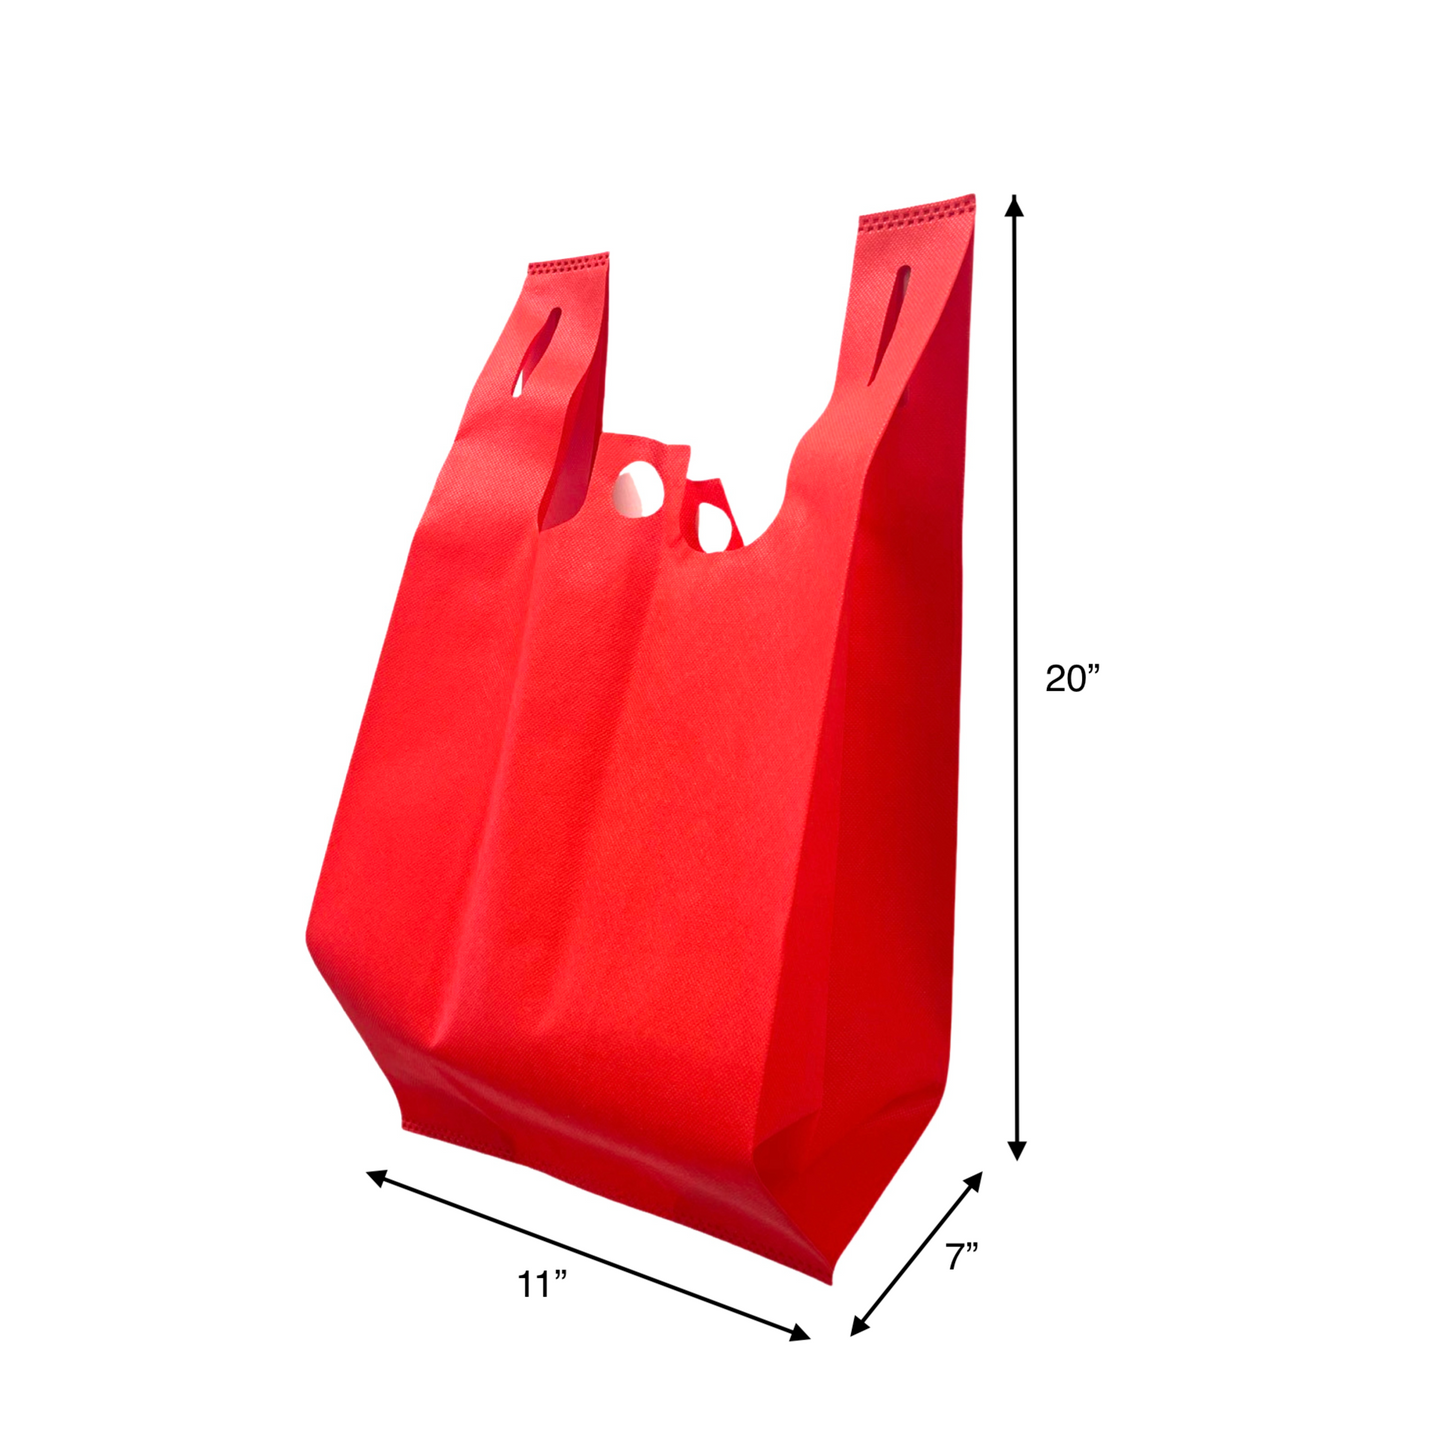 200pcs, T-Shirt Bag, 11x7x20 inches, Red Non-Woven Reusable Shopping Bags, with Pinch Bottom